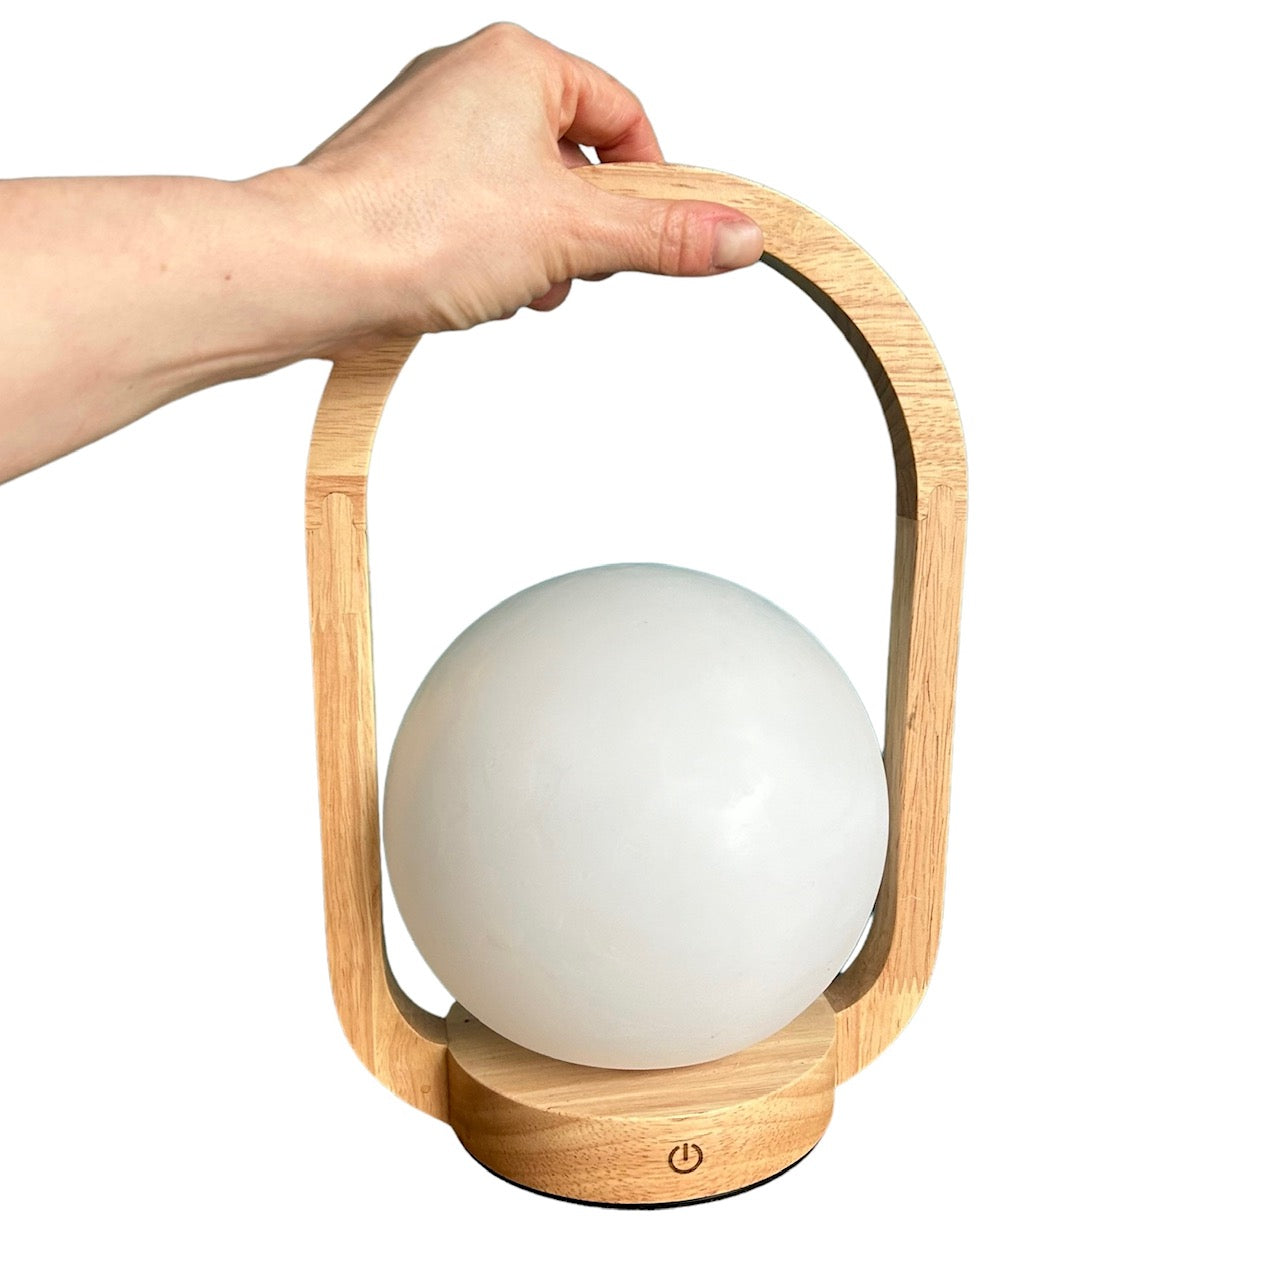 Rechargable touch lantern - beech style wood lamp